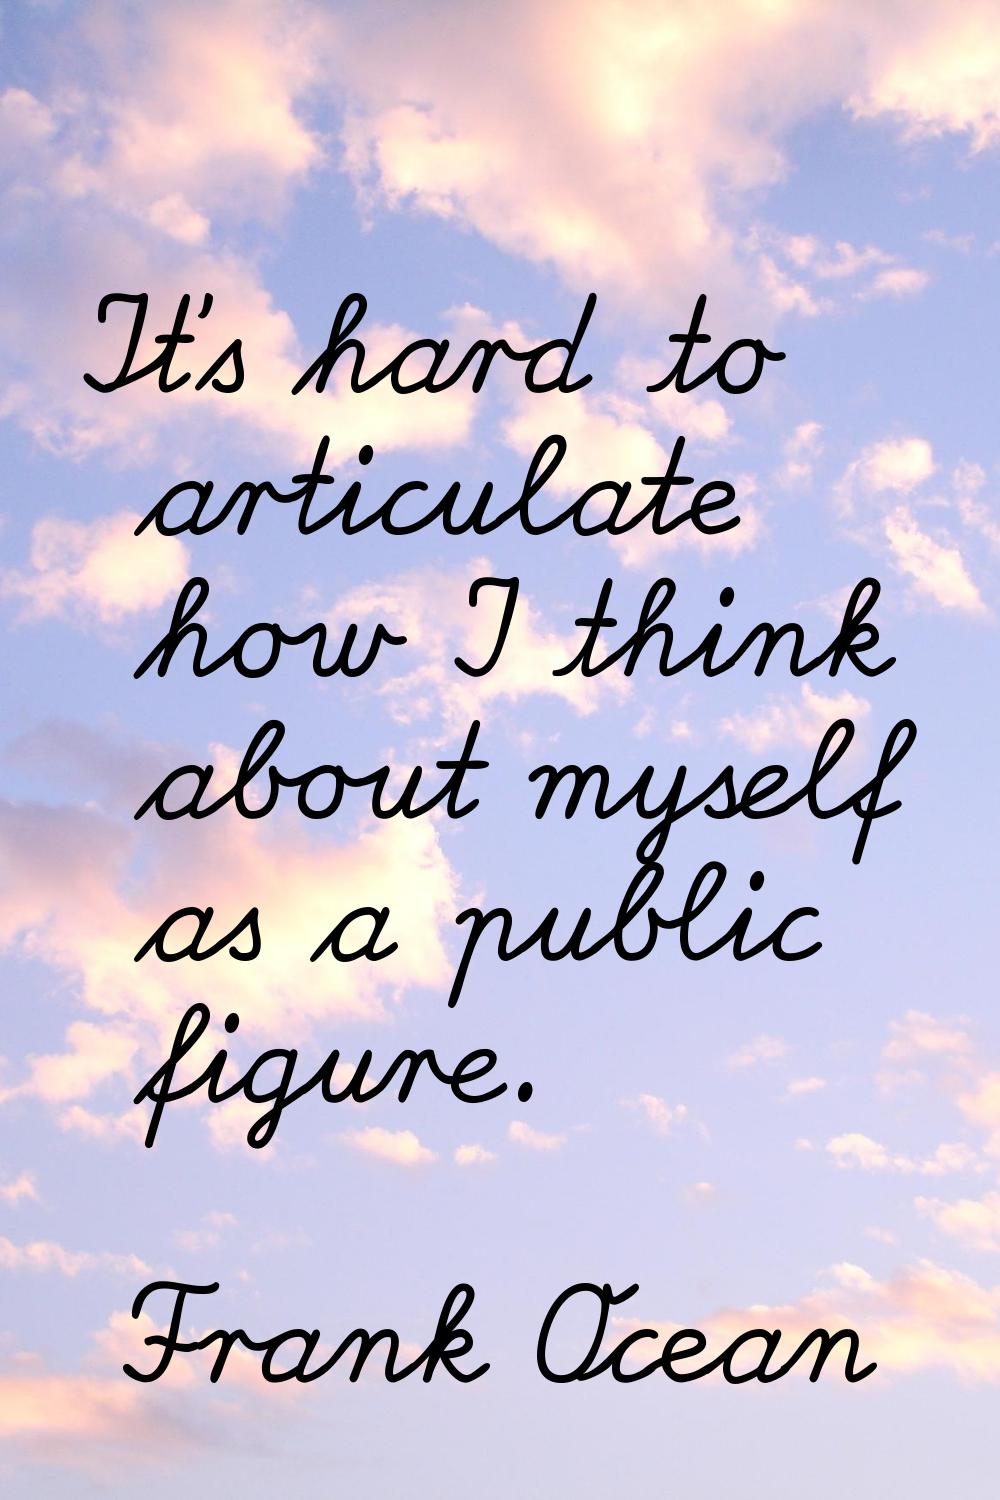 It's hard to articulate how I think about myself as a public figure.